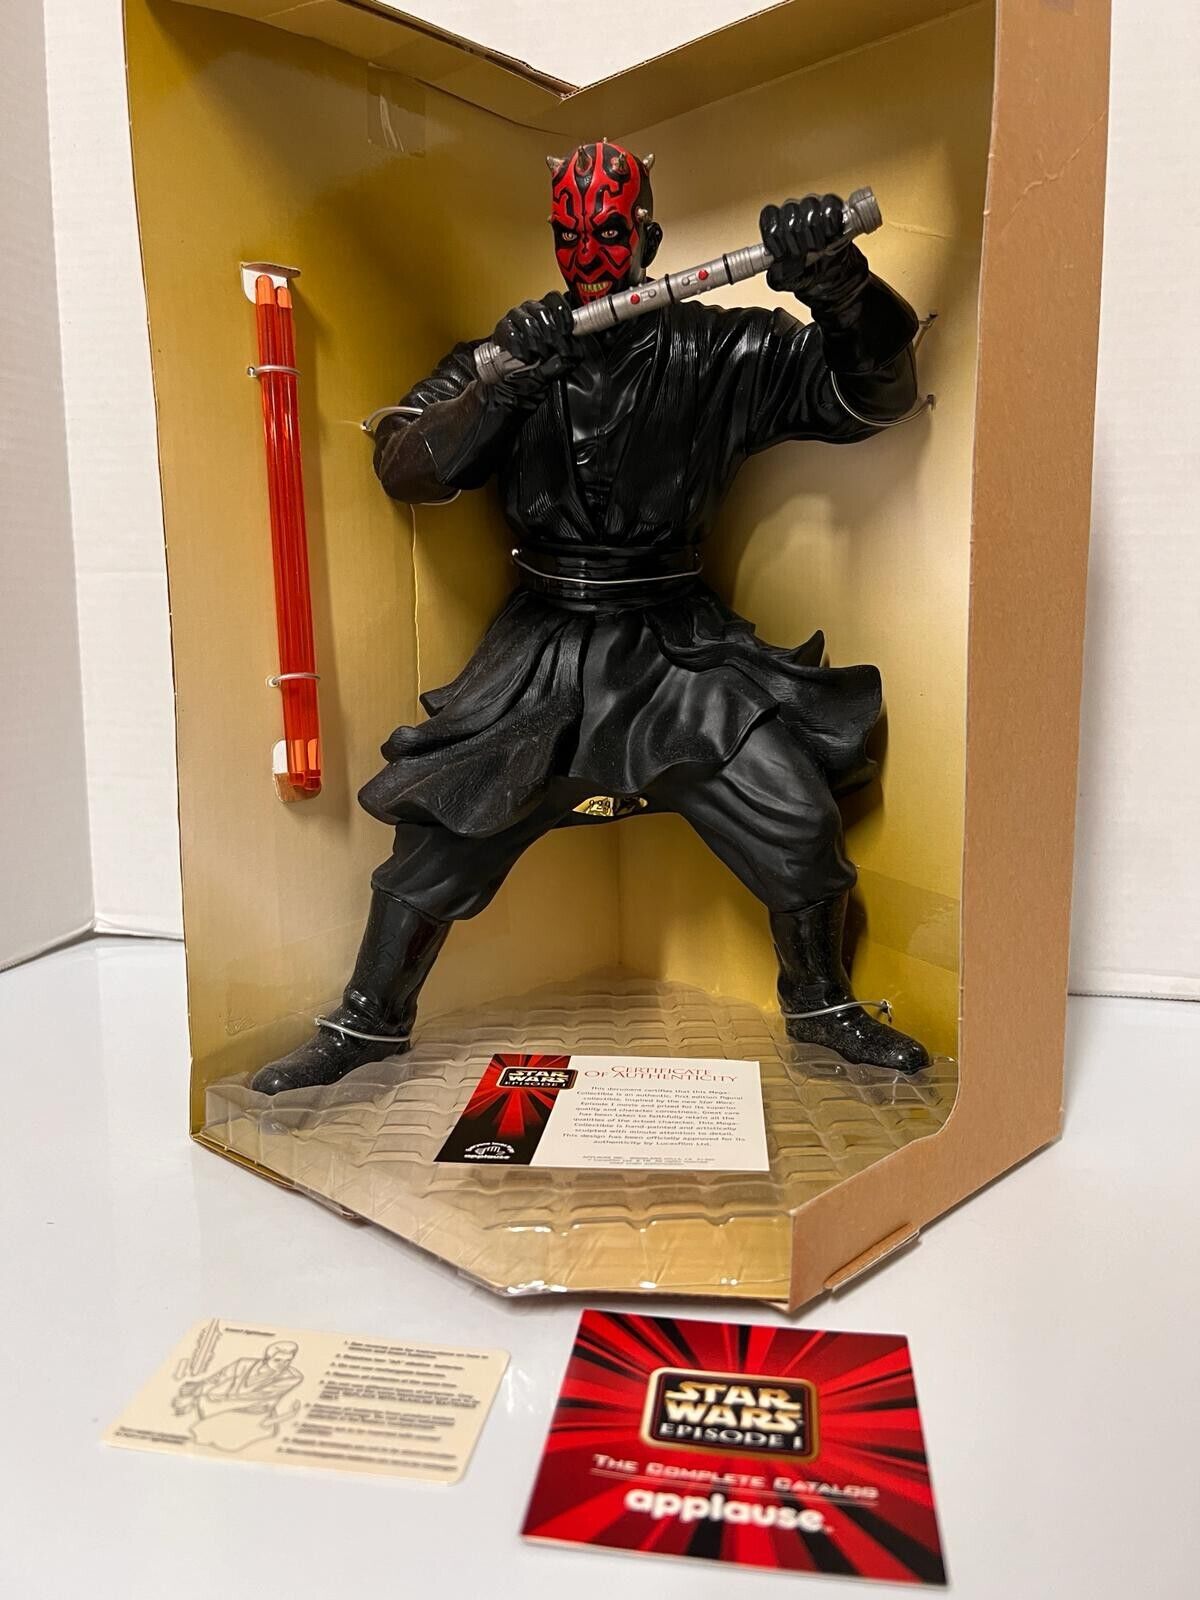 1999 Applause Star Wars Darth Maul Collectible W/Certificate Of Authenticity